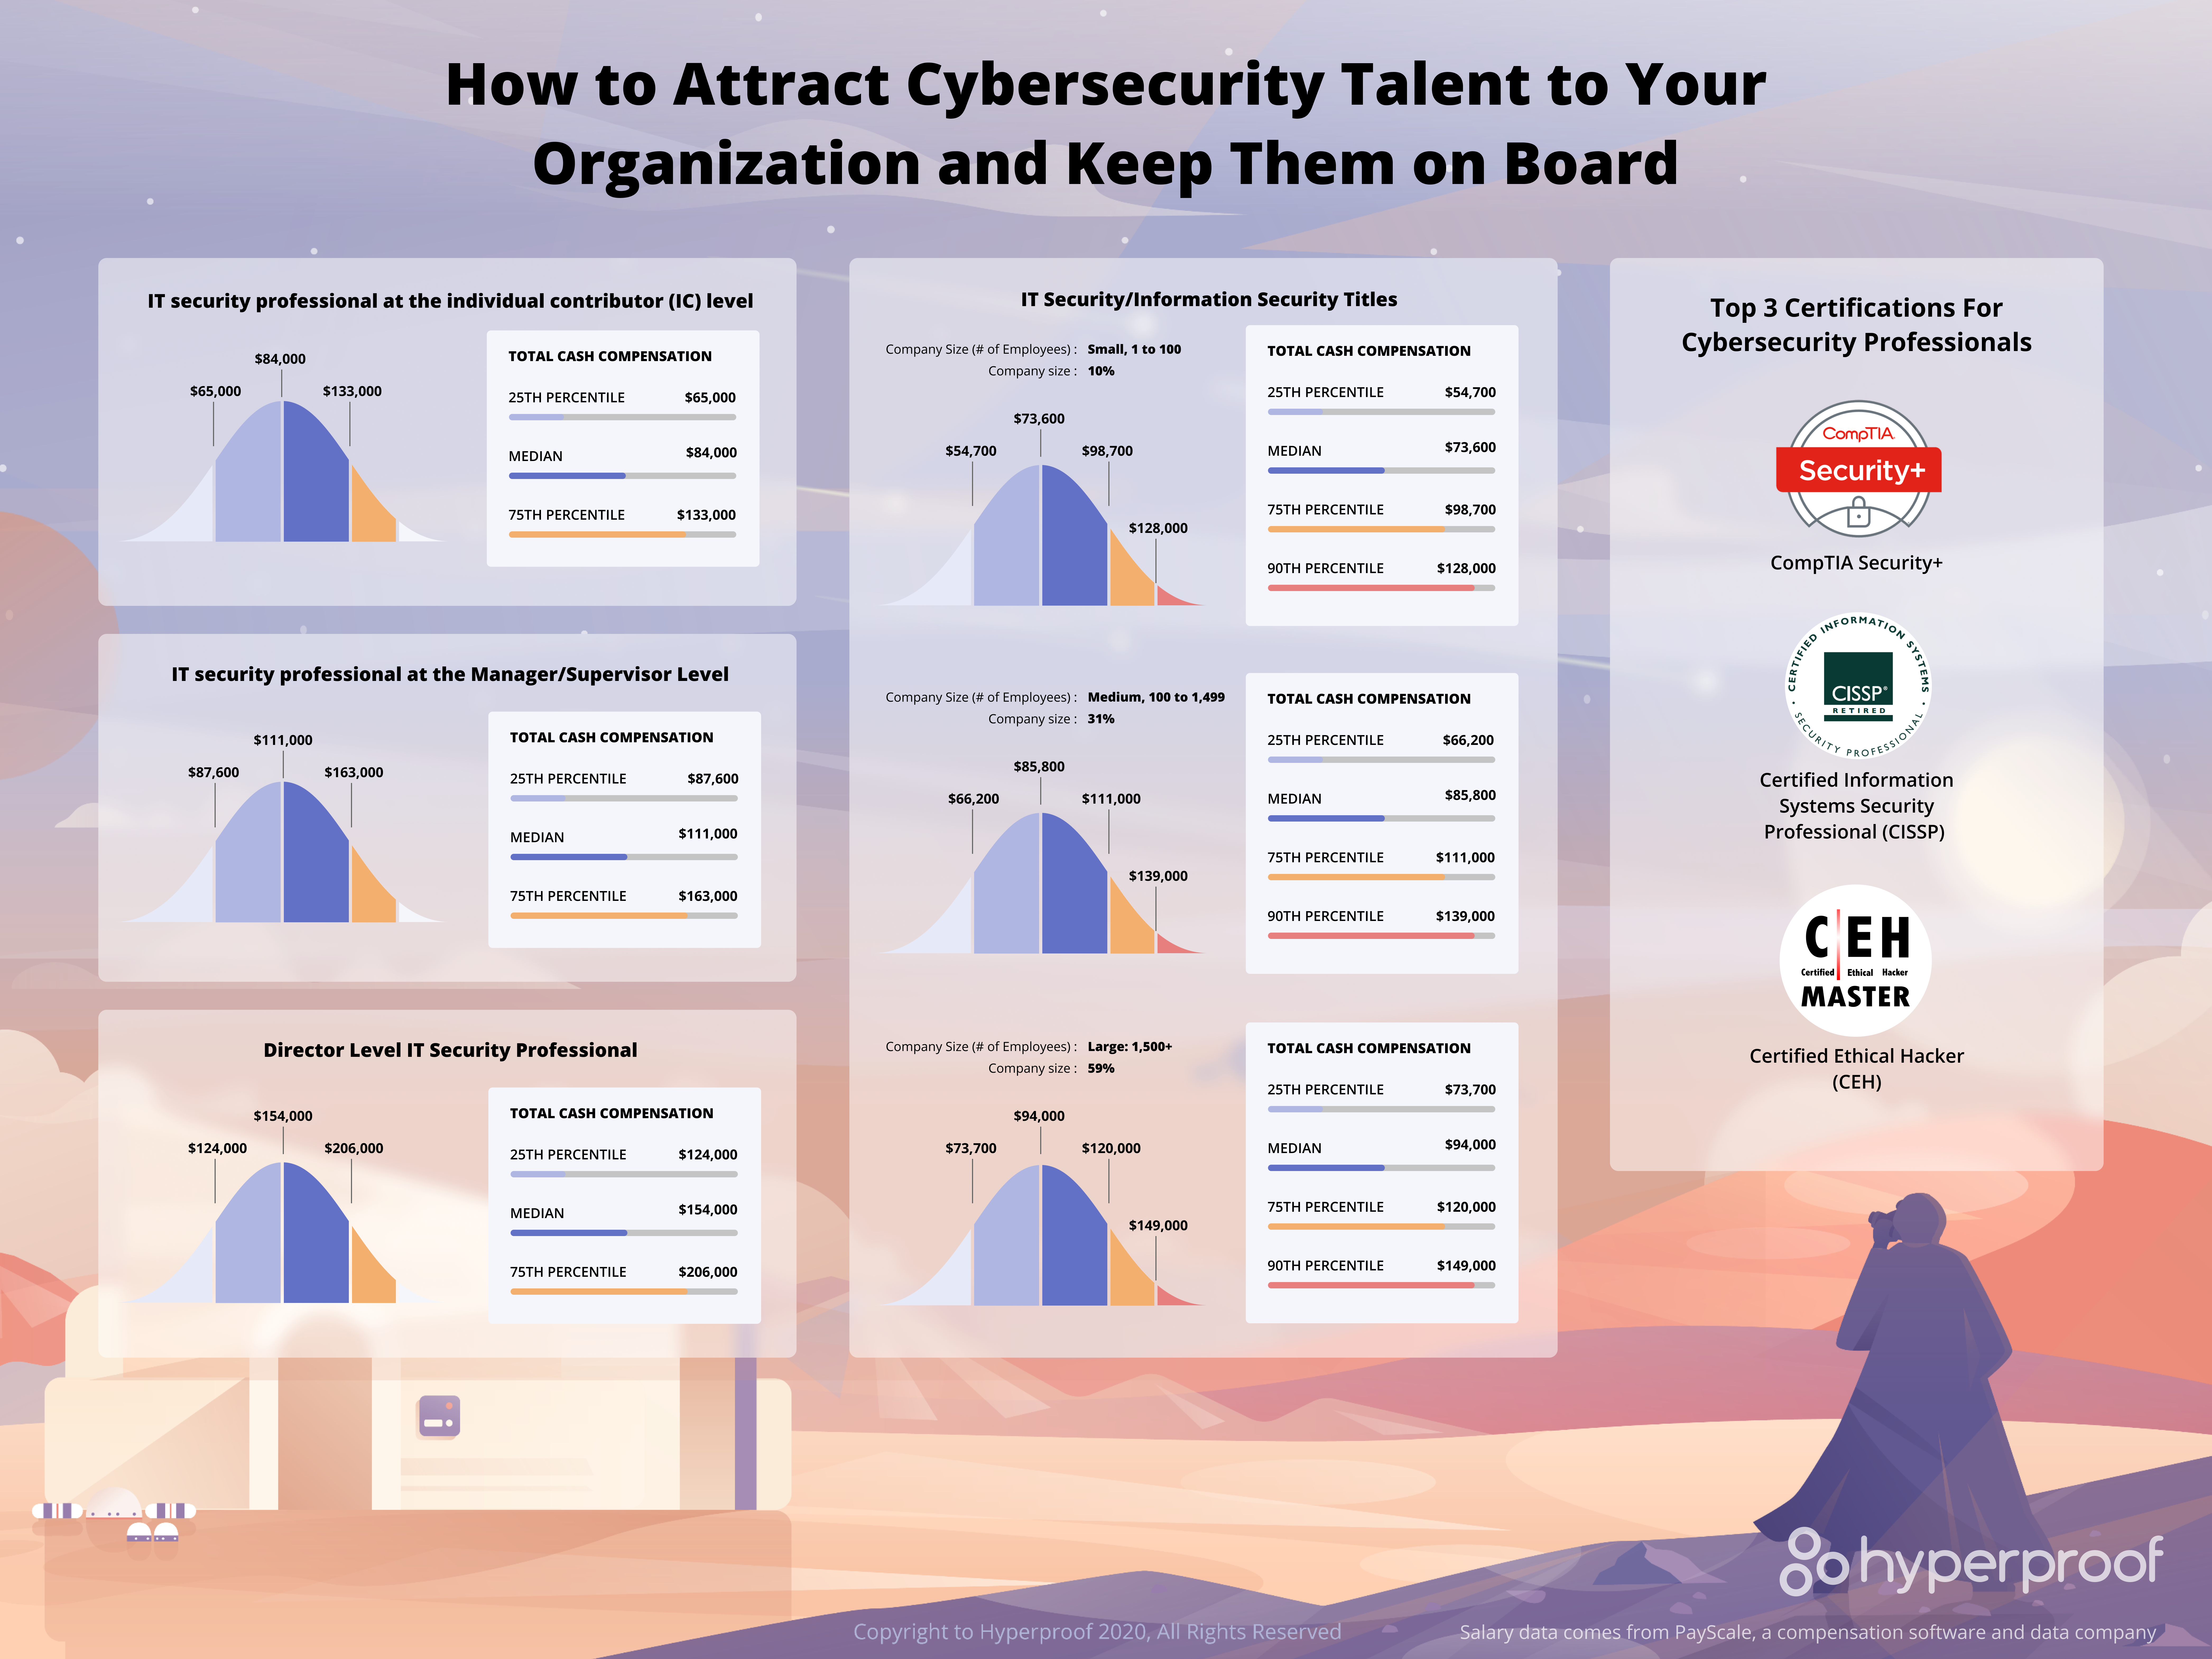 Top cybersecurity talent is hard to find. Get one-of-a-kind market